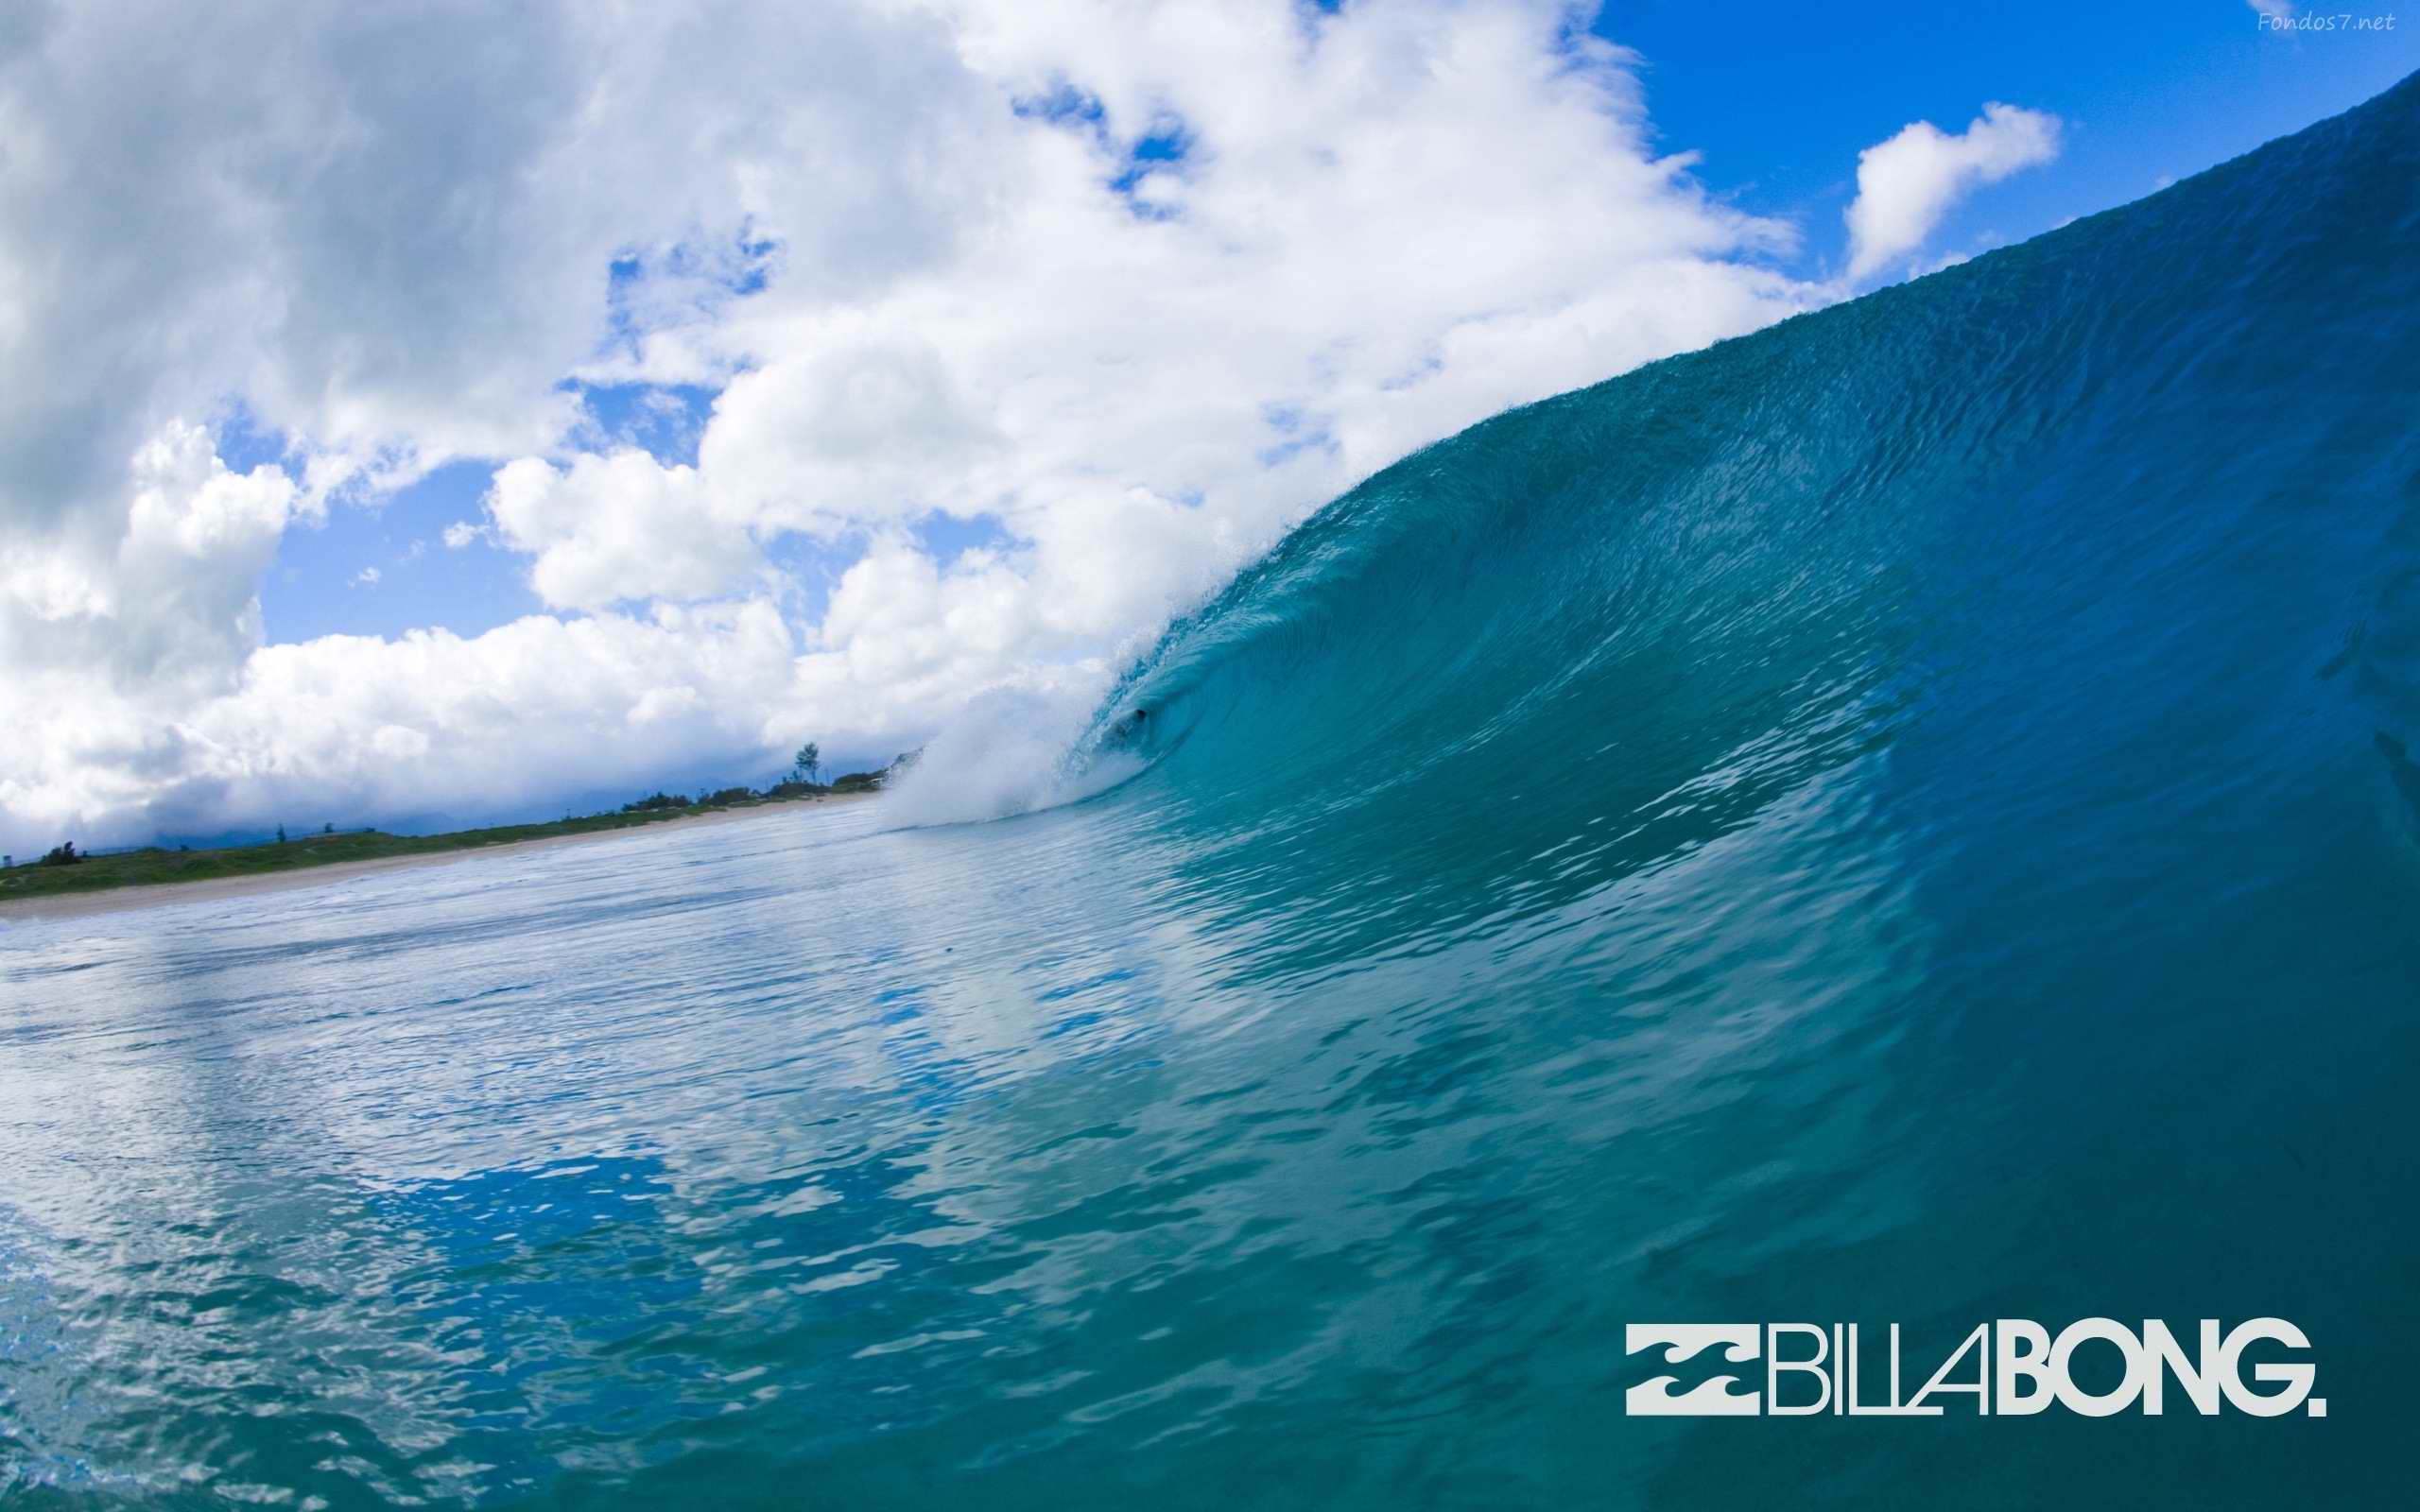 Wallpapers For > Billabong Wallpapers For Ipad